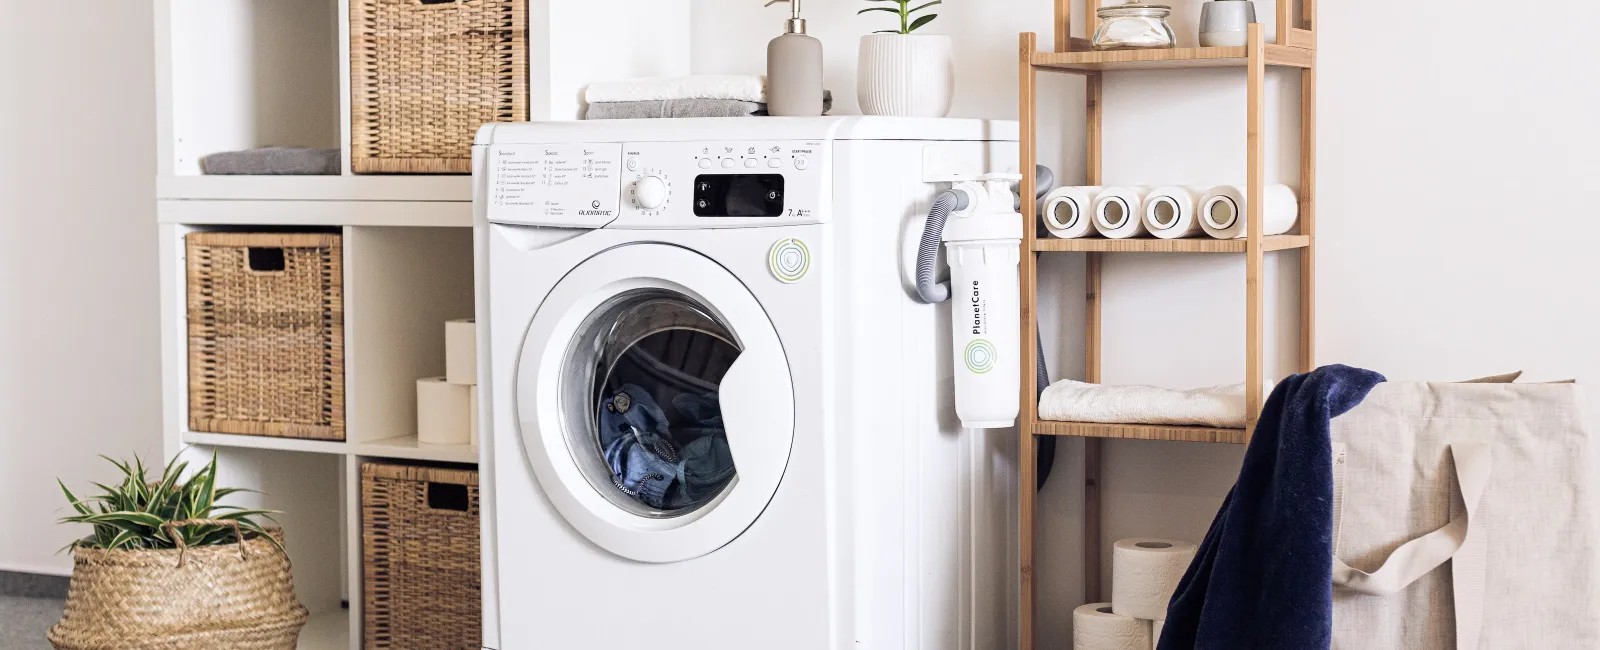 How to Drain a Washing Machine by Hand